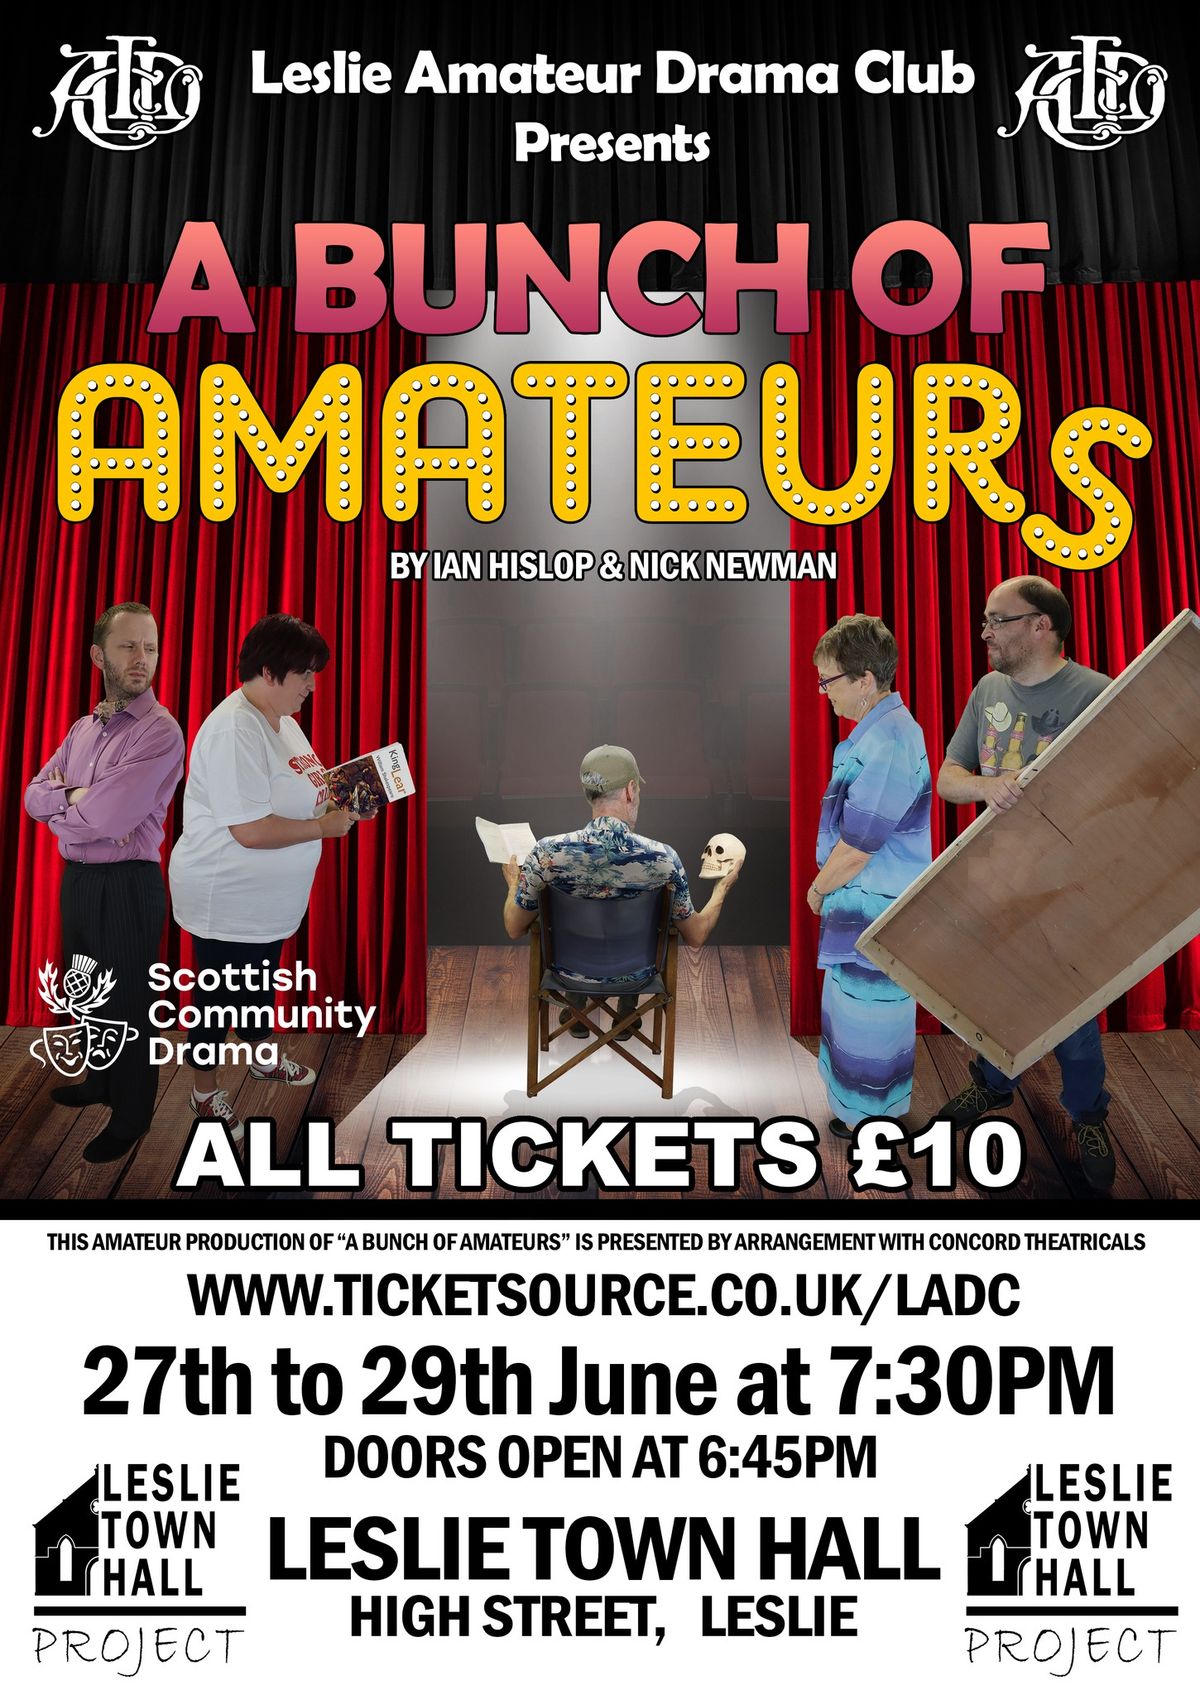 Leslie Amateur Drama Club Presents - A Bunch of Amateurs by Ian Hislop and Nick Newman 